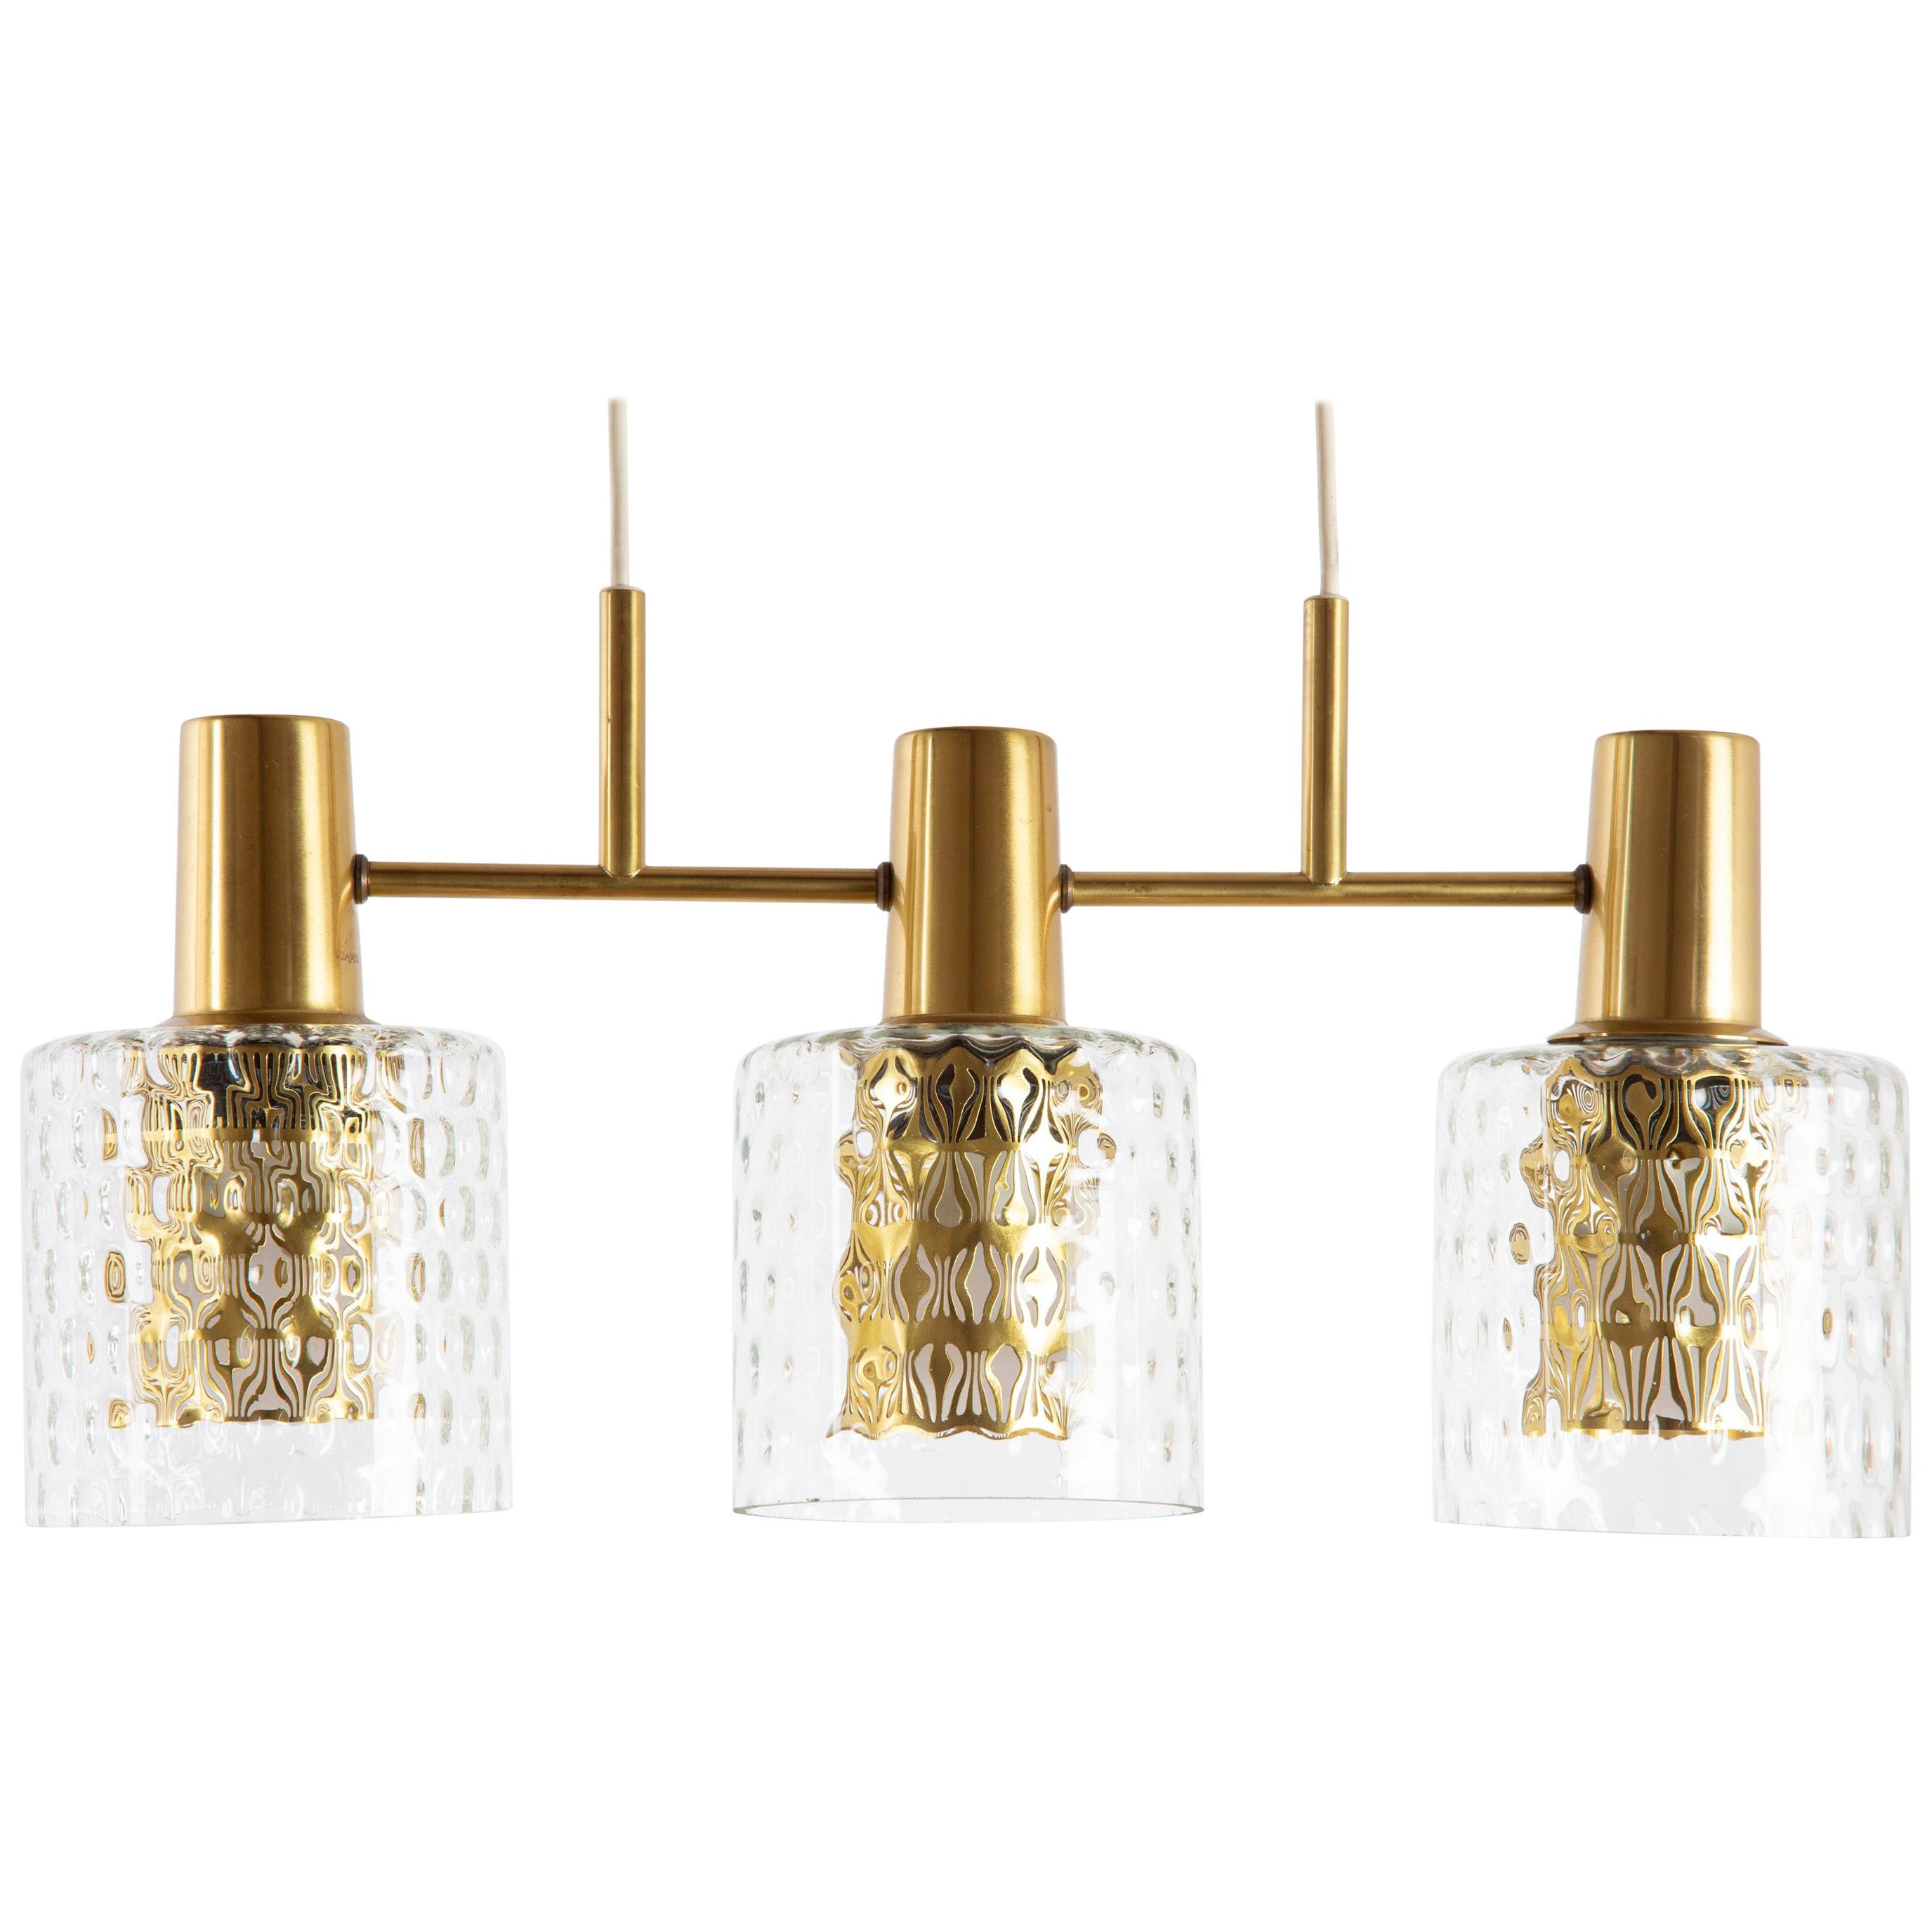 Hans Agne Jakobsson Scandinavian Pendant Lamp with Brass and Glass For Sale